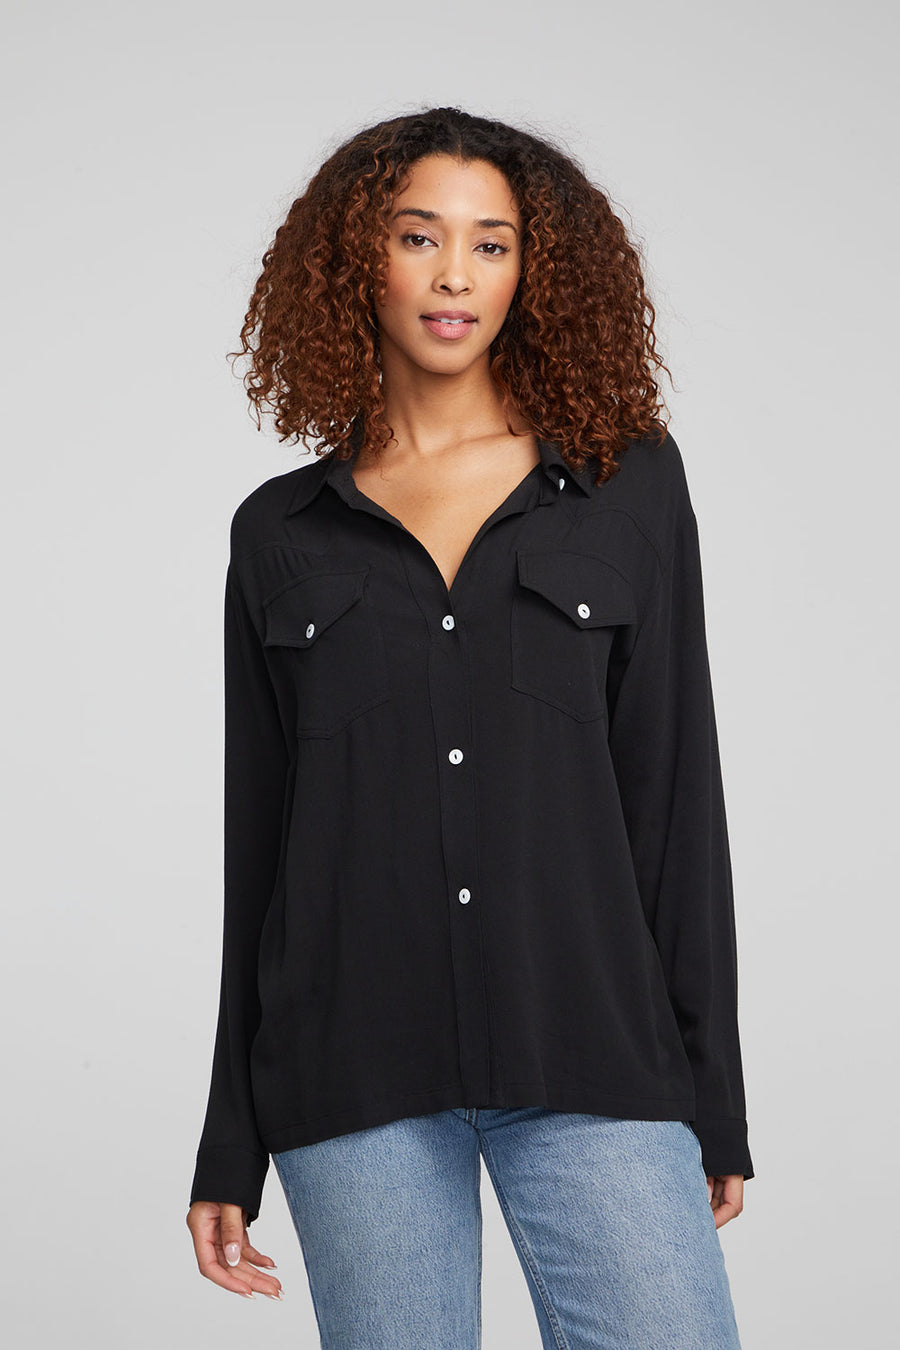 Penmar Shadow Black Blouse WOMENS chaserbrand